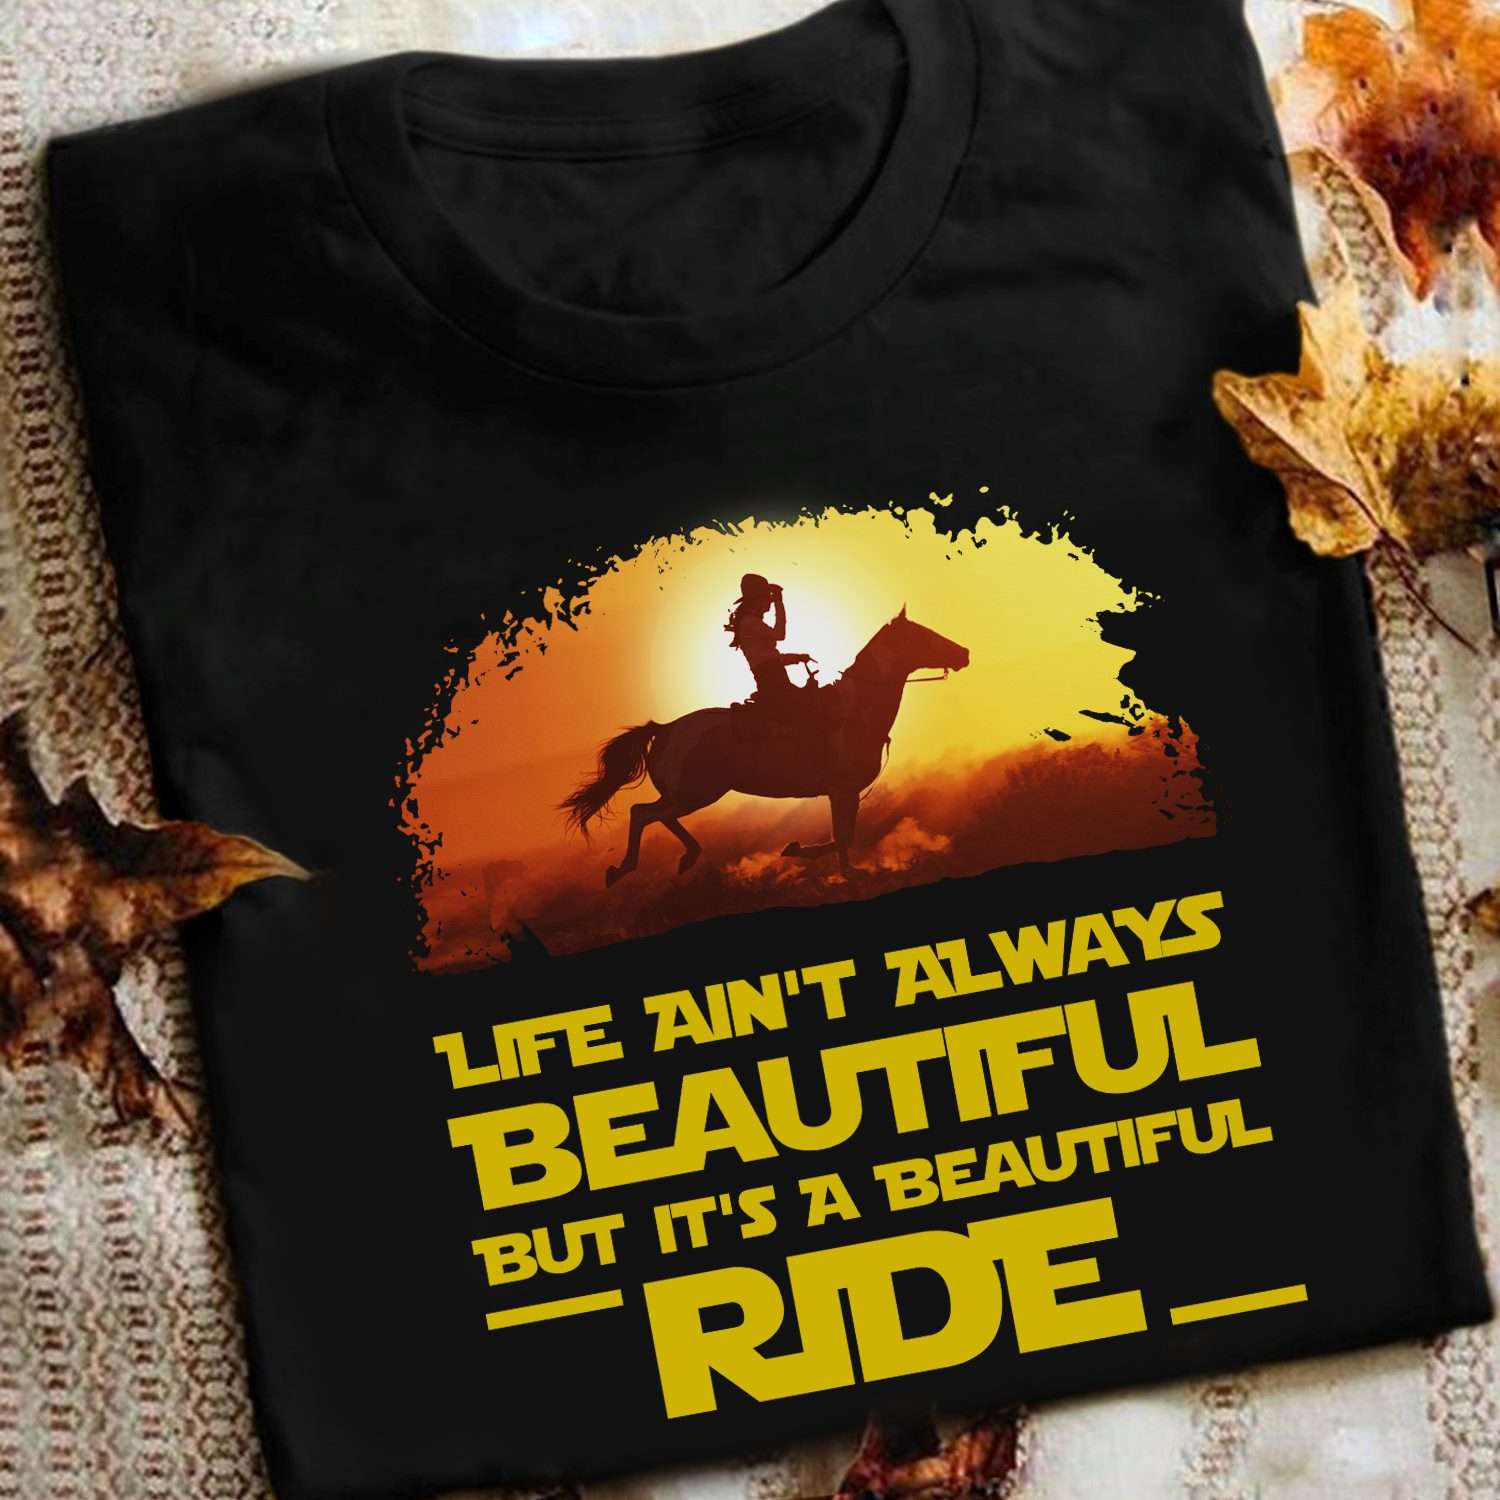 Woman Riding Horse - Life ain't always beautiful but it's a beautiful ride